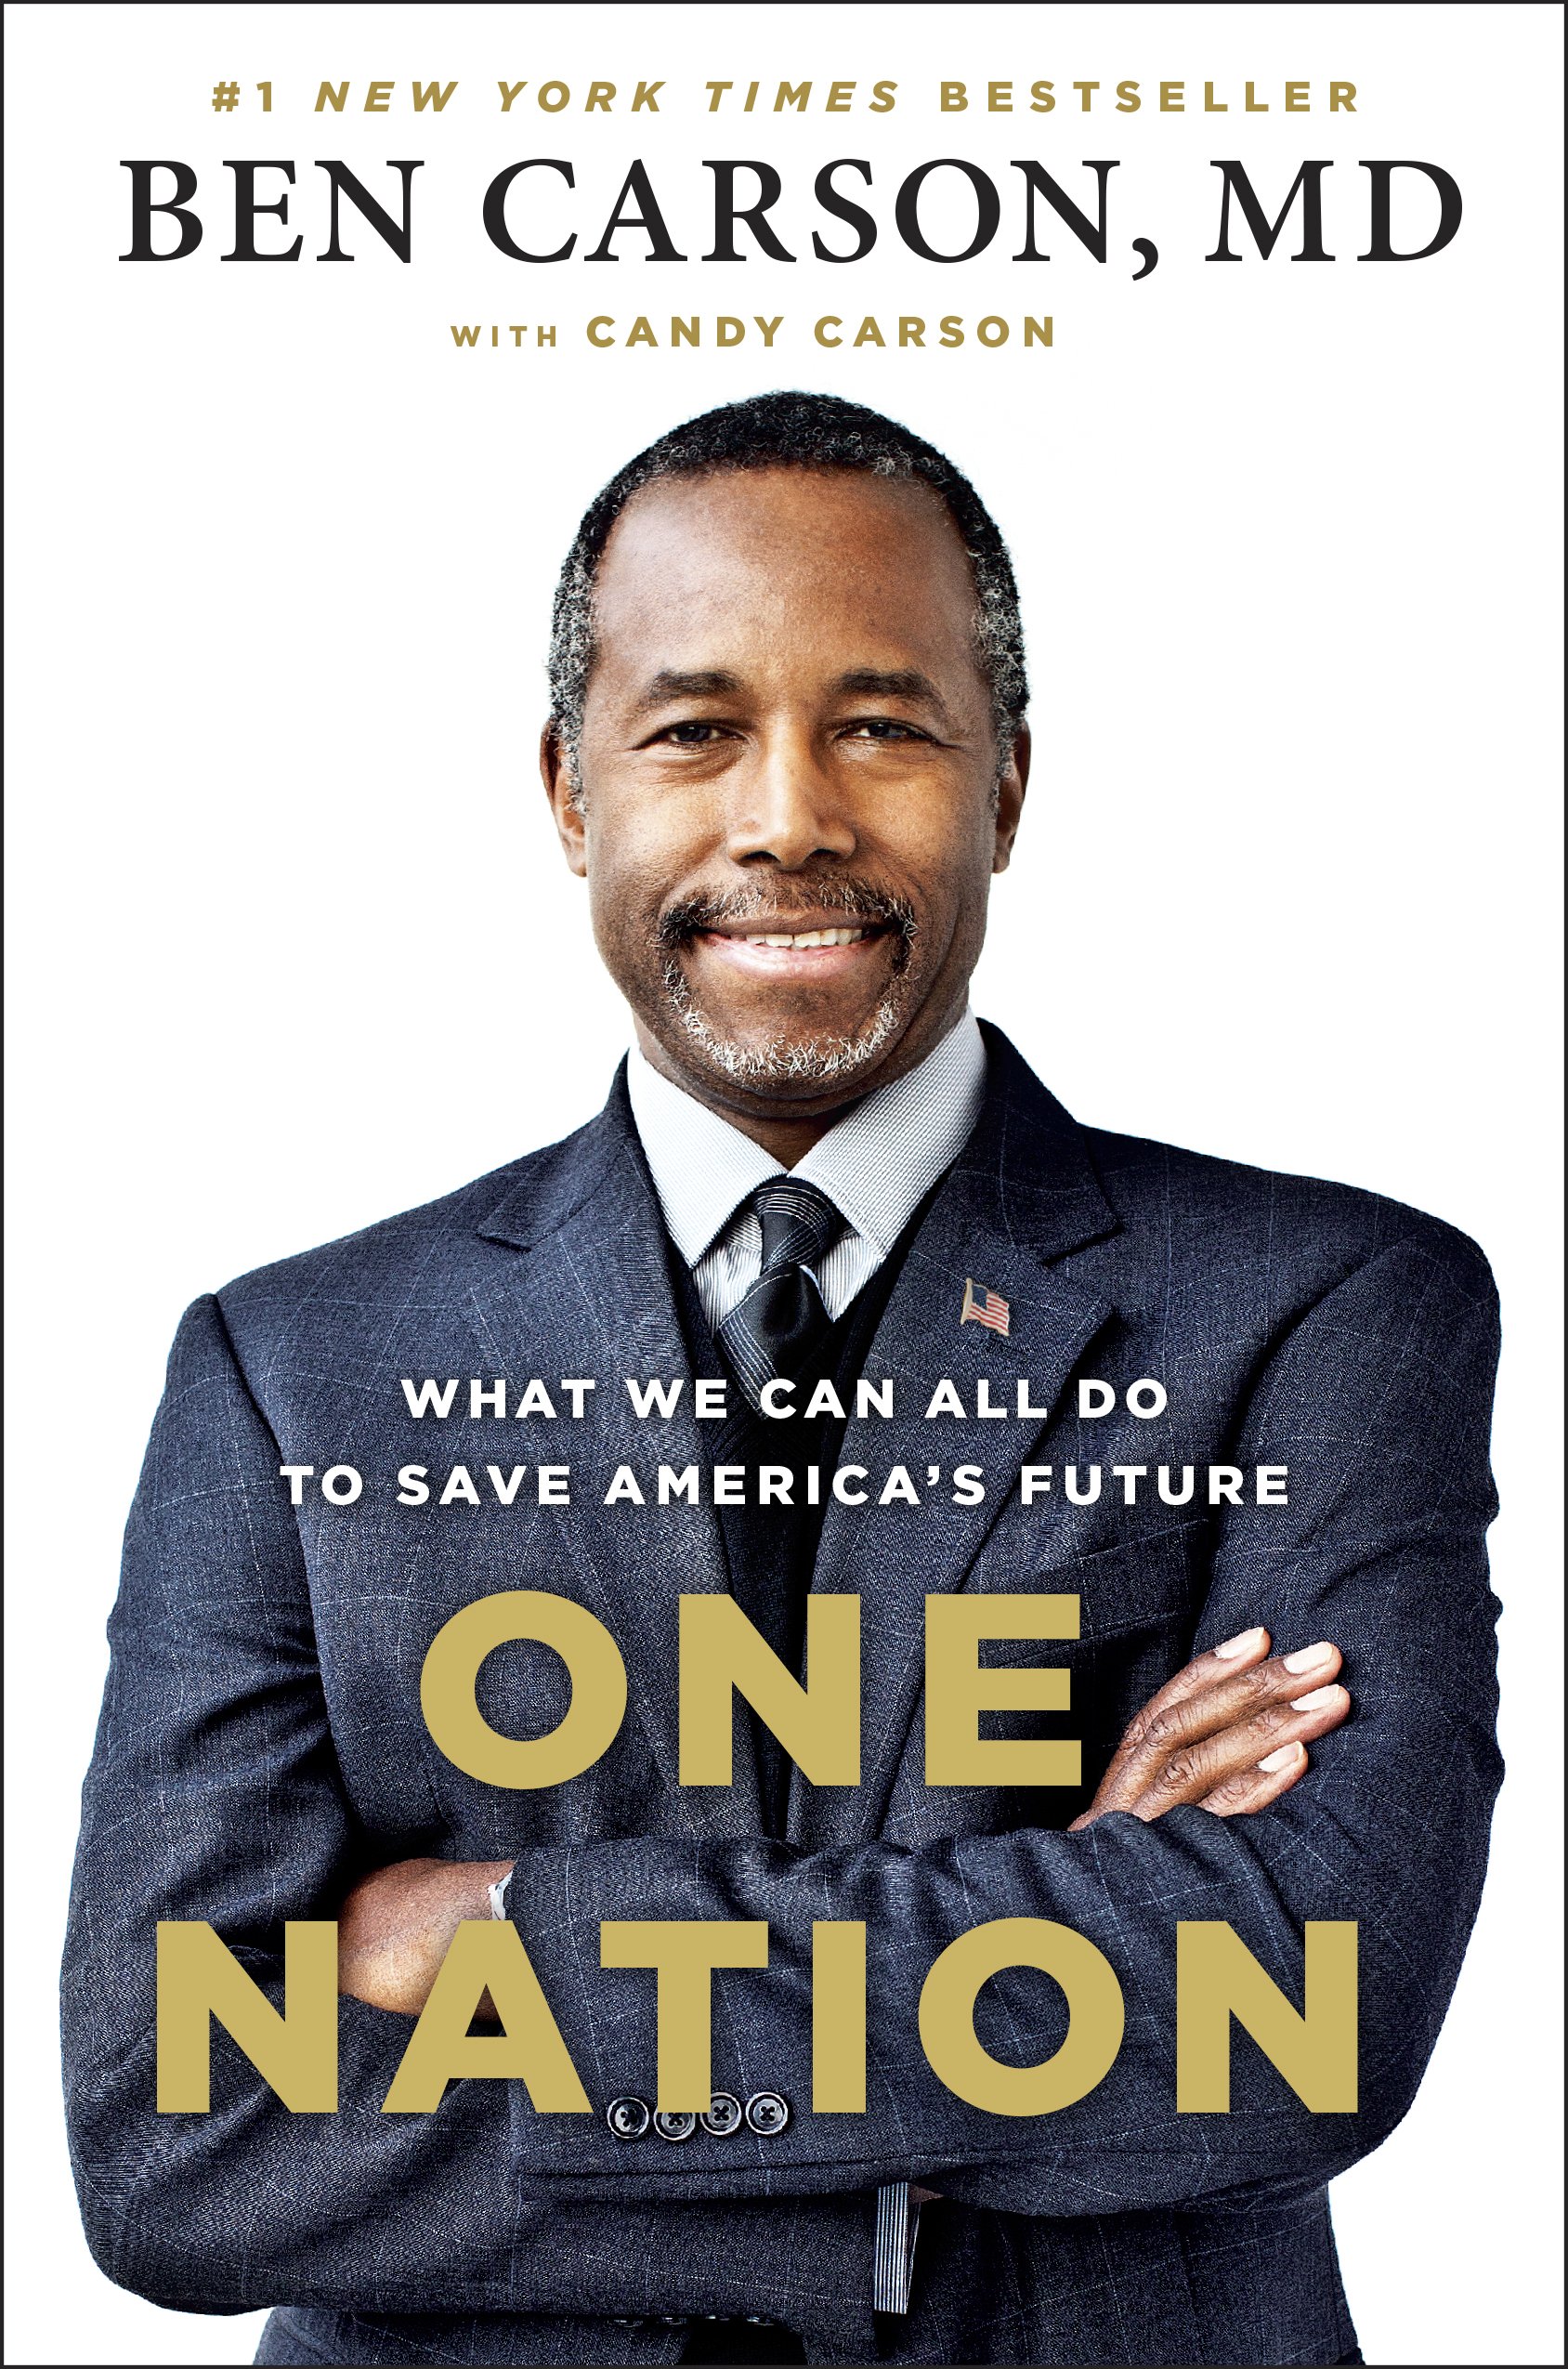 Retired neurosurgeon Ben Carson's 2014 book  One Nation  is a variation on the theme, the crossed arms and the subtitle underlining the message, since he's not been a politician before.